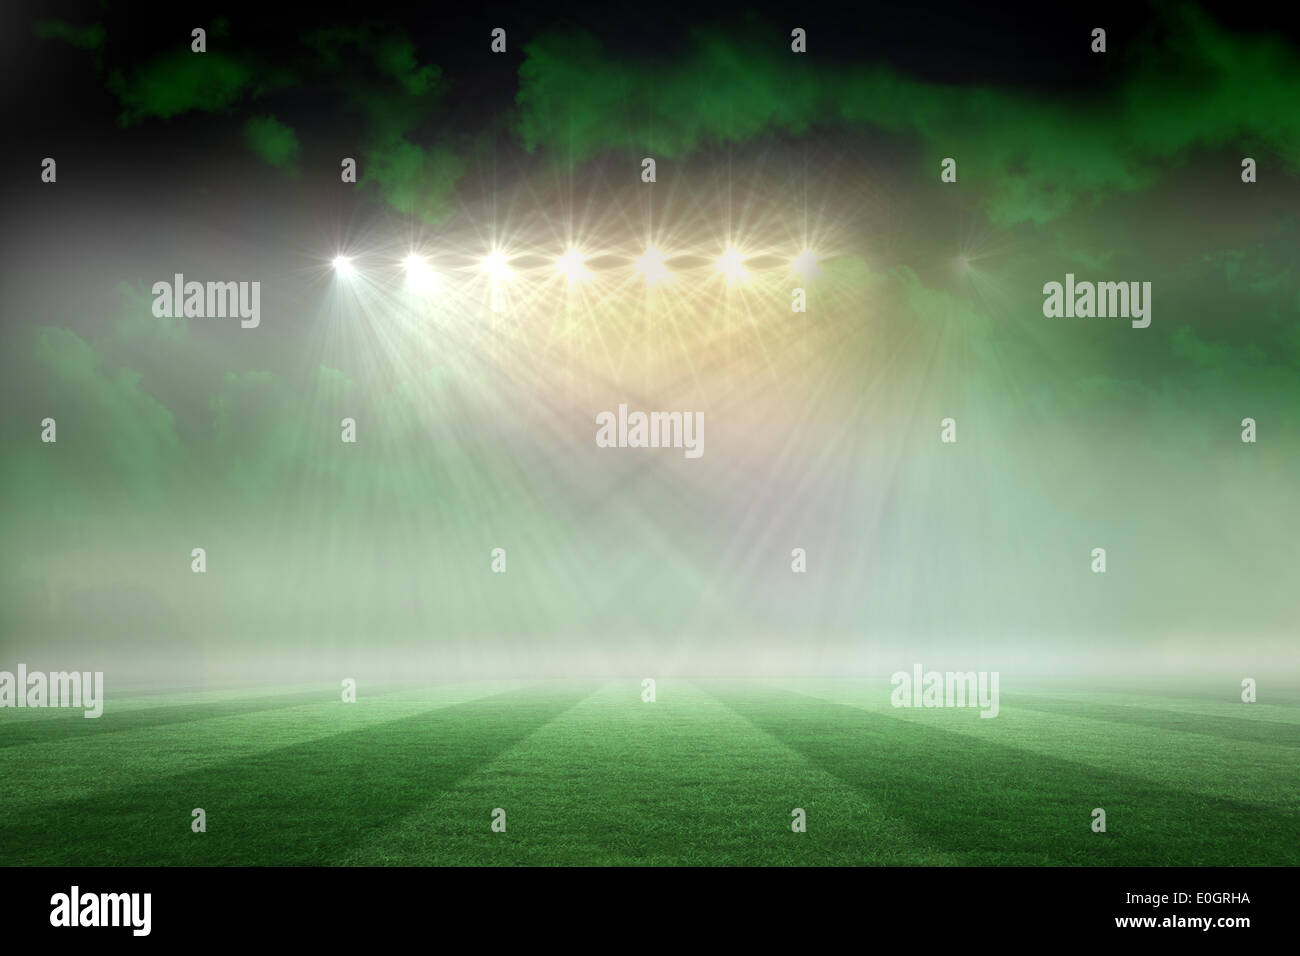 Football pitch under green sky and spotlights Stock Photo